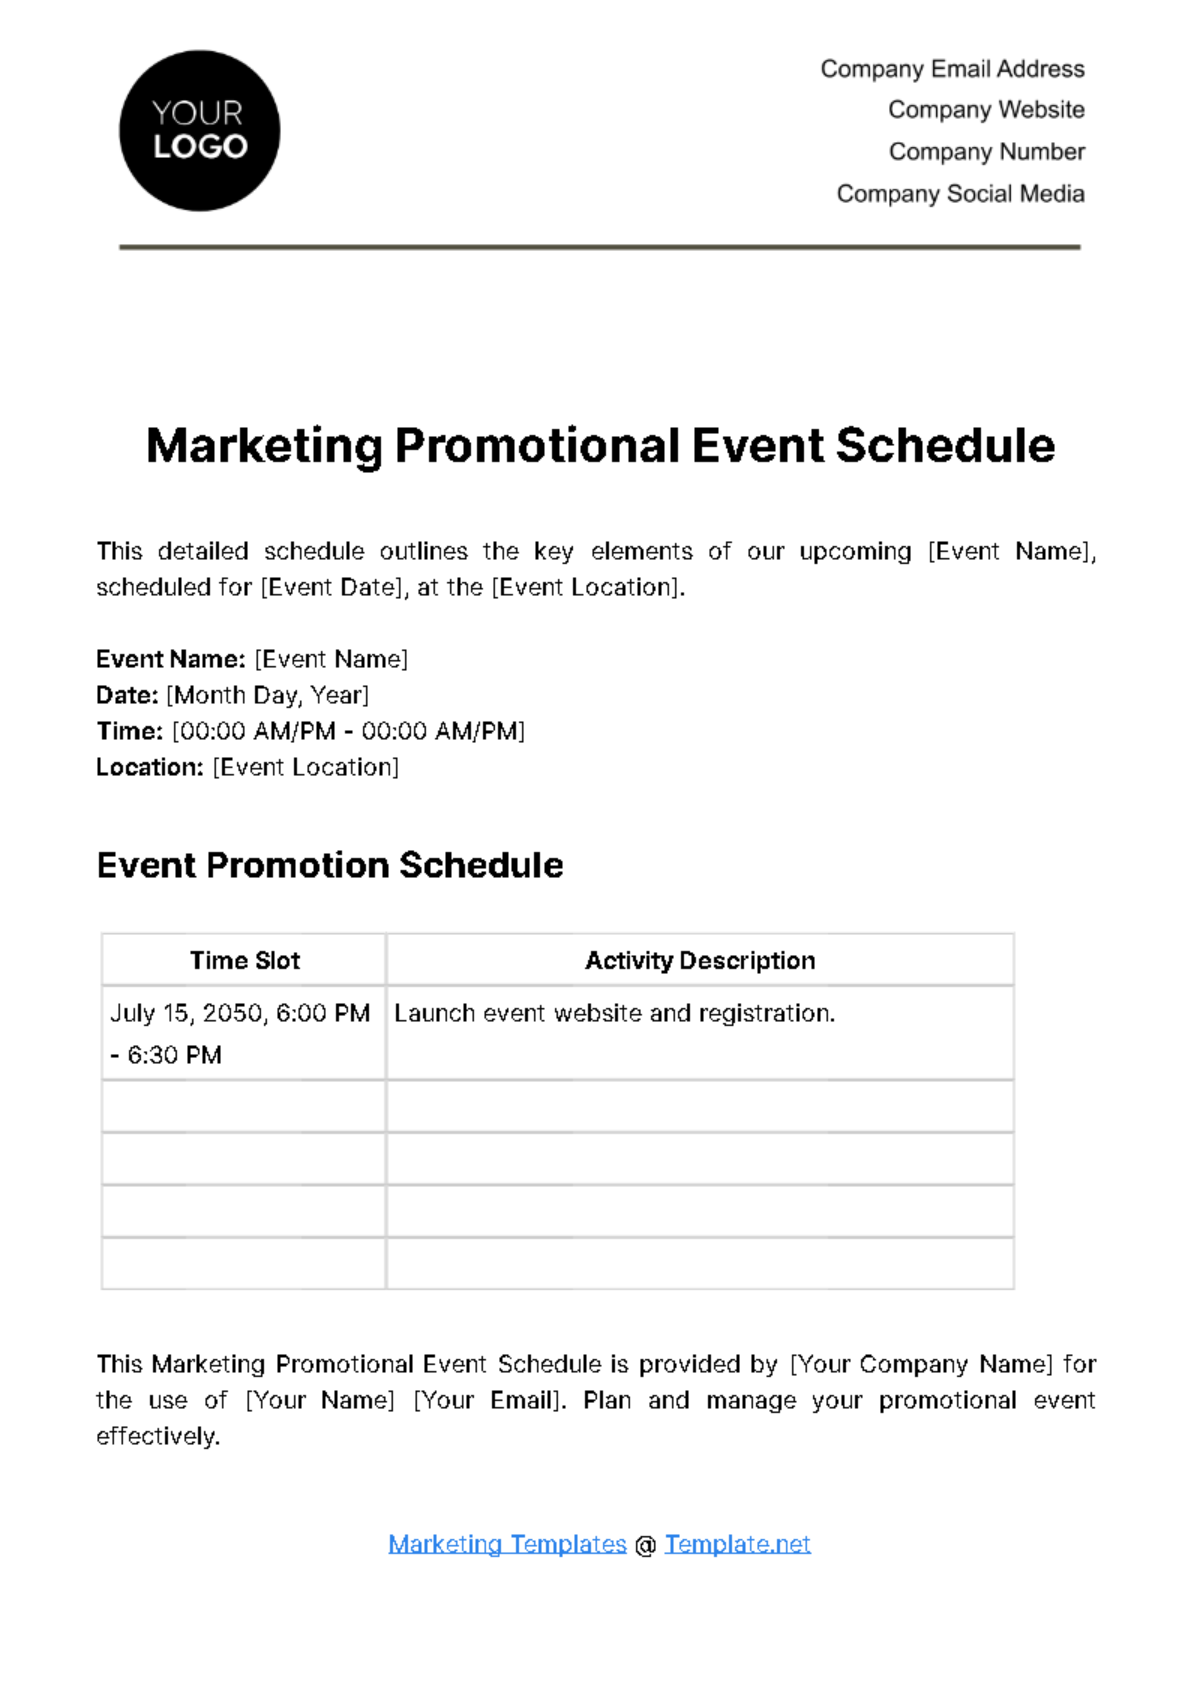 Free Marketing Promotional Event Schedule Template